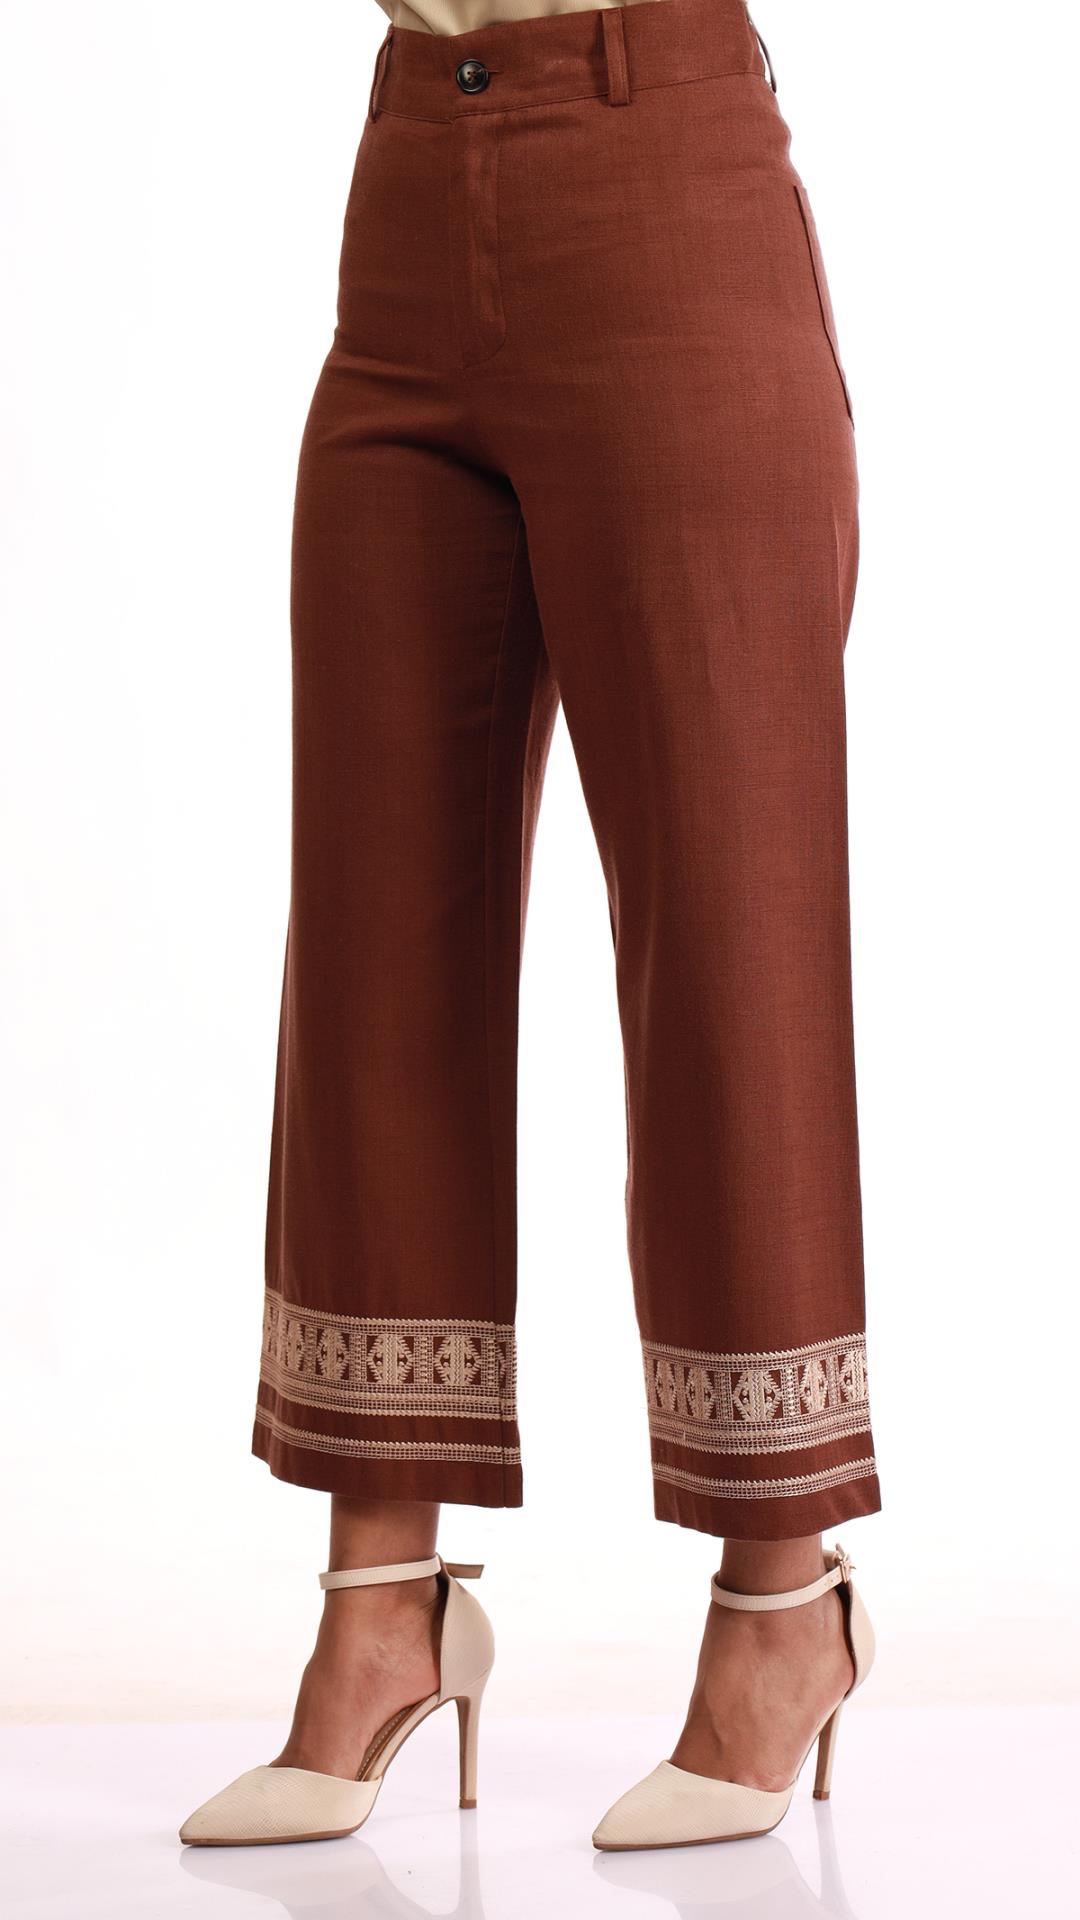 Embroidered trousers on the bottom 